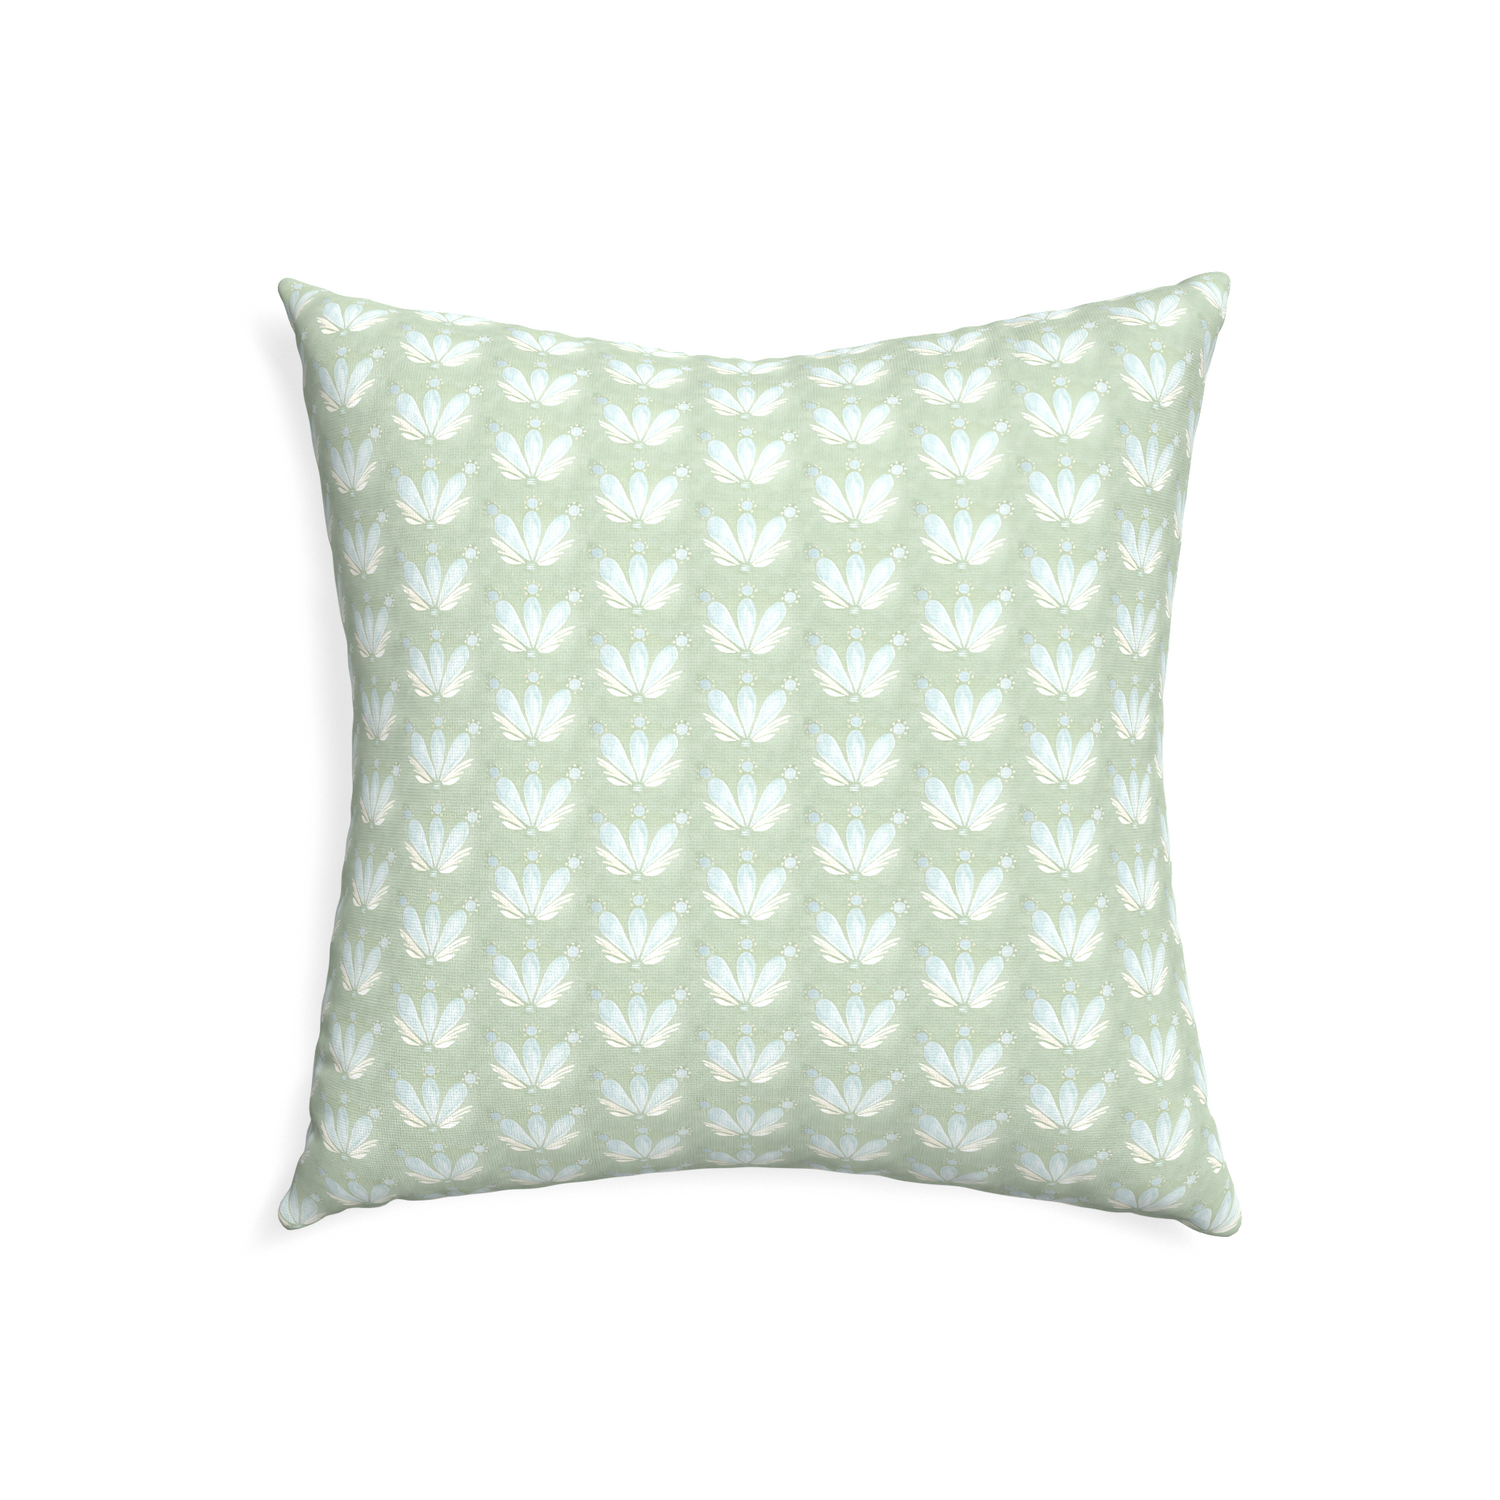 22-square serena sea salt custom blue & green floral drop repeatpillow with none on white background